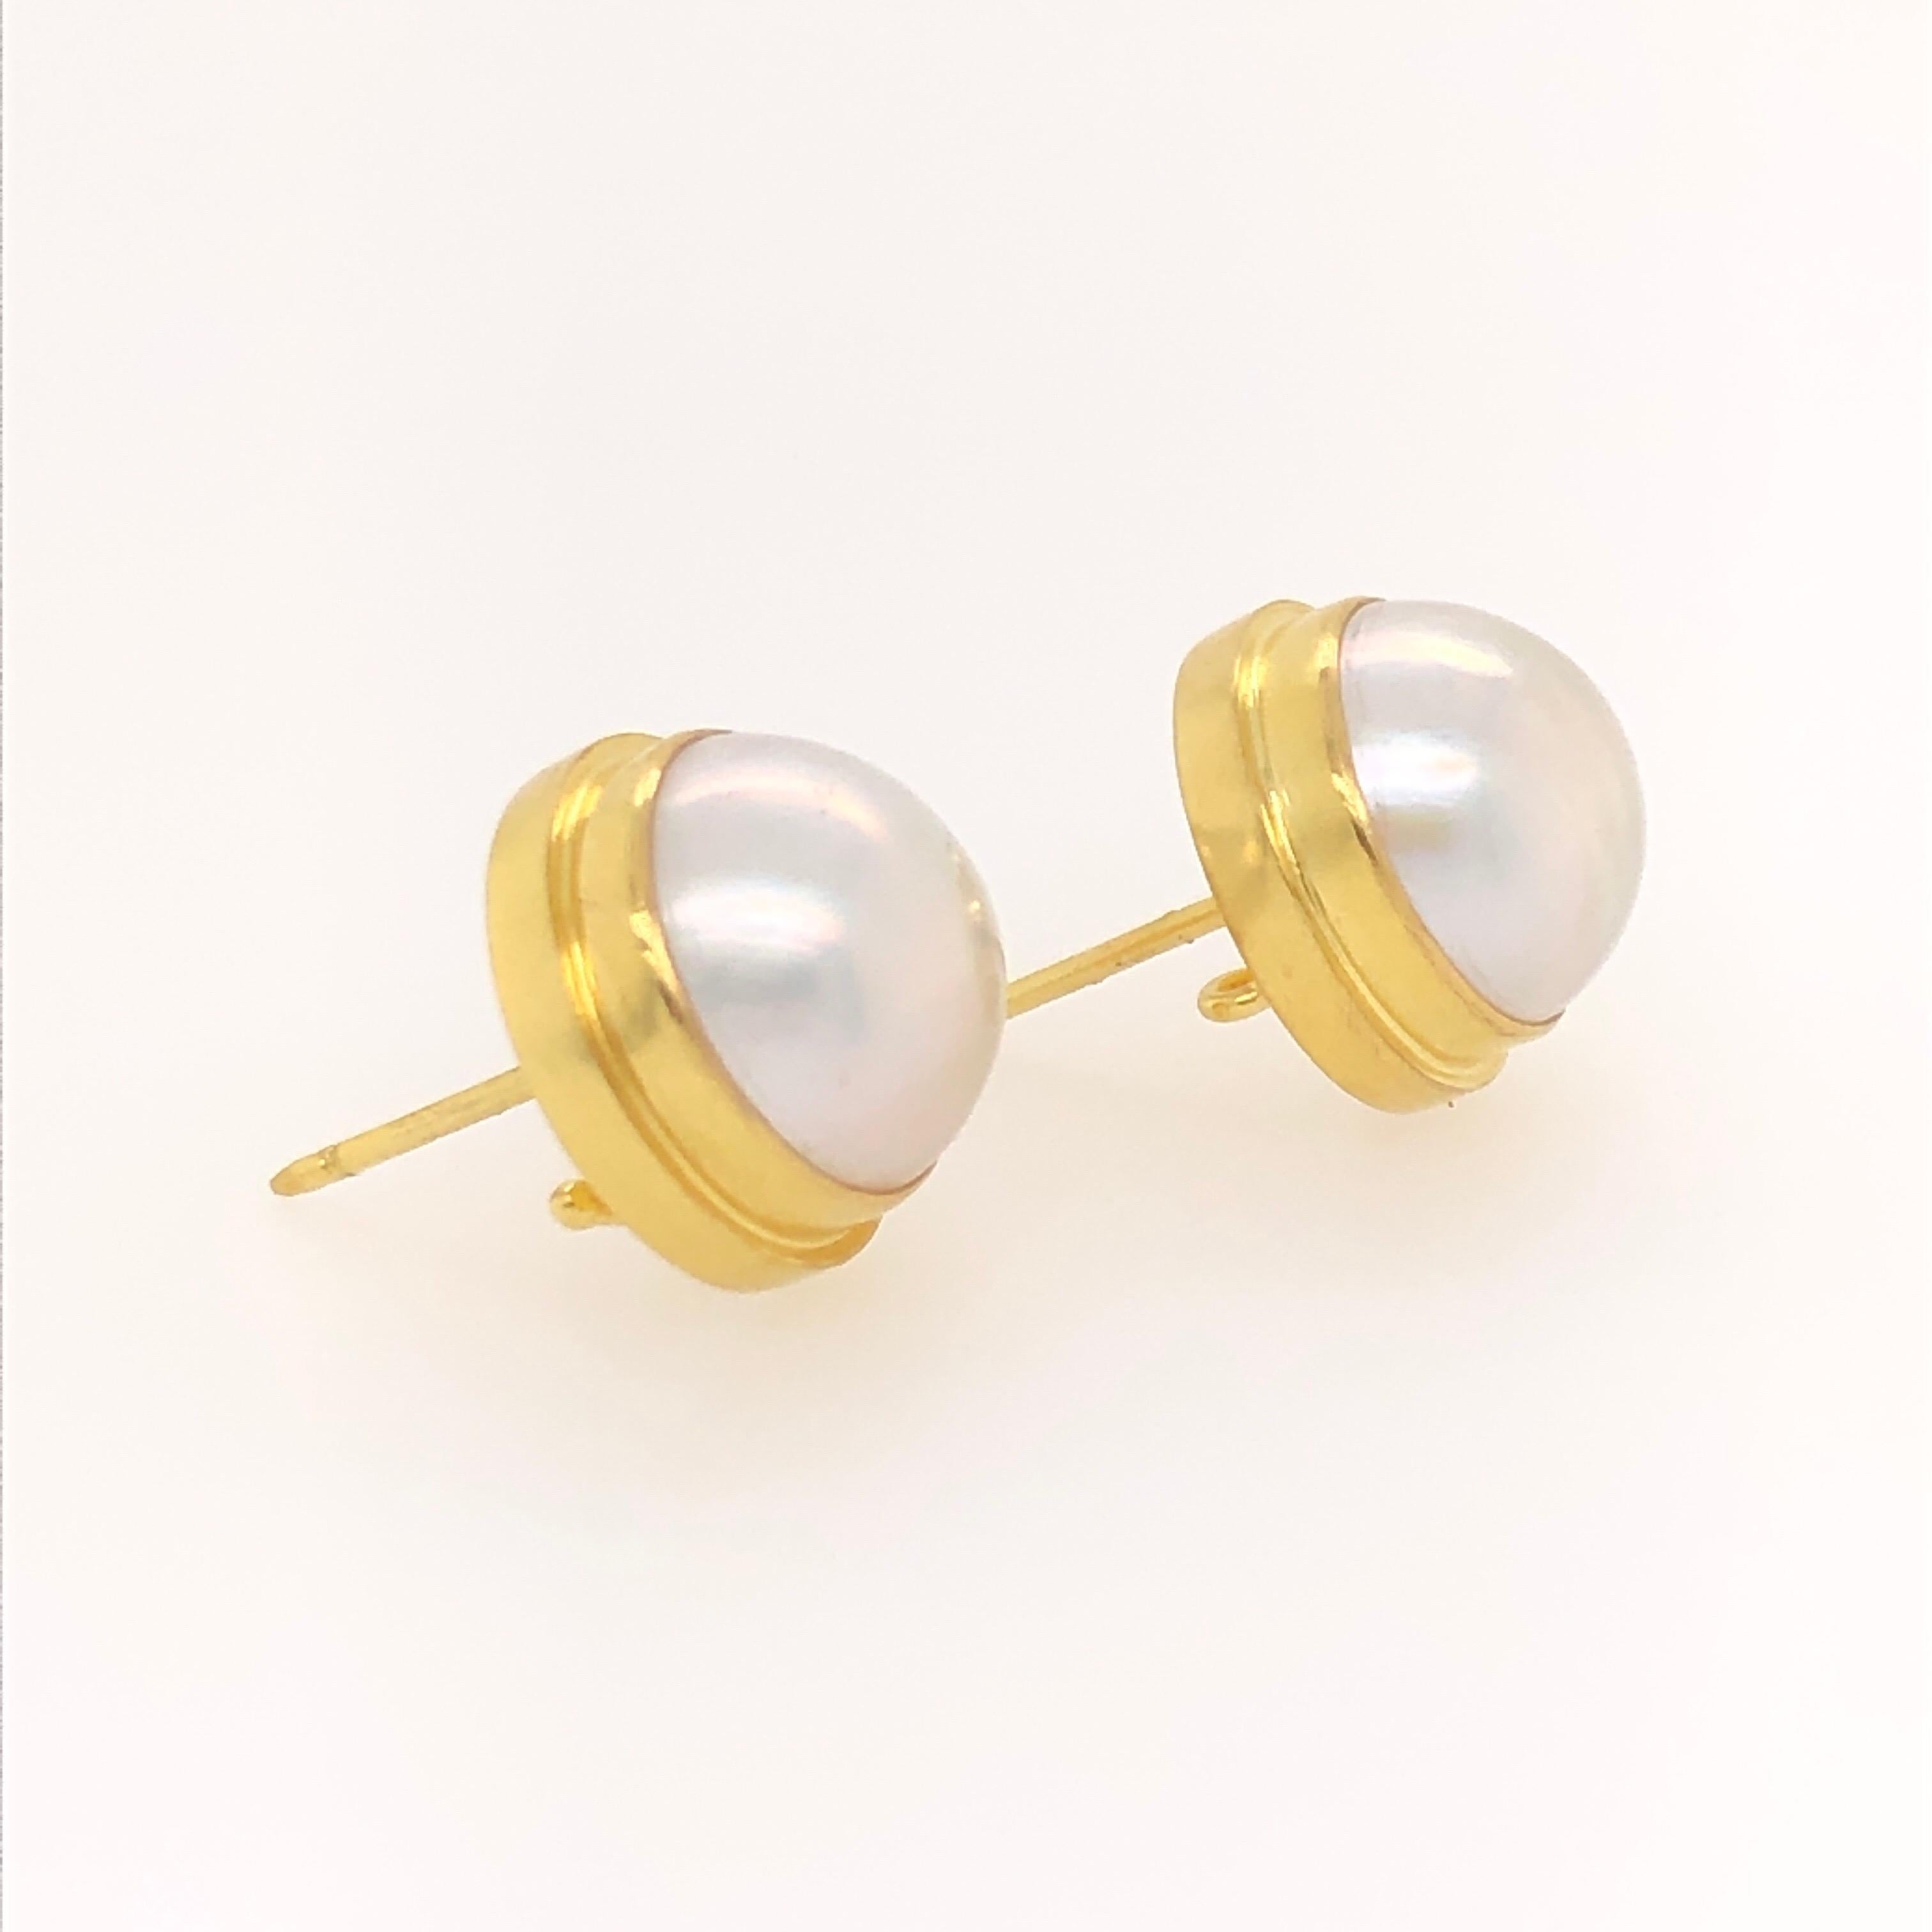 This pair of Kimarie earring studs feature two 13 millimeter mabe pearls set in 18K yellow gold. The setting themselves have a hook from which charms can be attached making them super versatile. Wear them with your favorite jeans and a white t-shirt